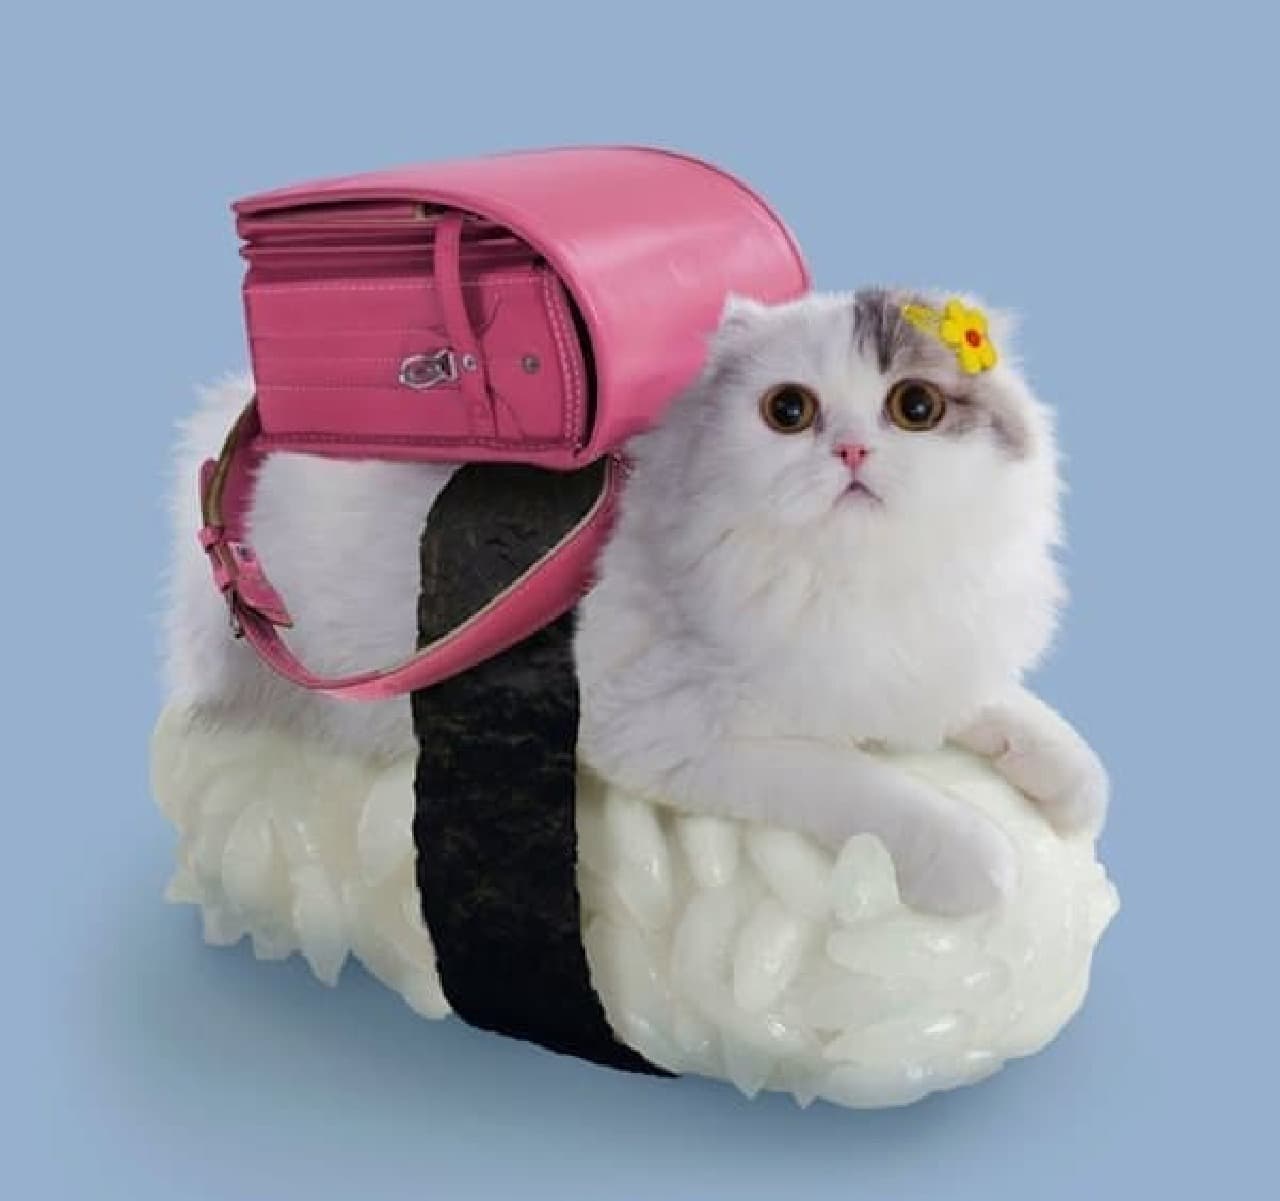 School bag cat sushi "Toromi" that Mr. Dorothy Tan of Taxi also liked